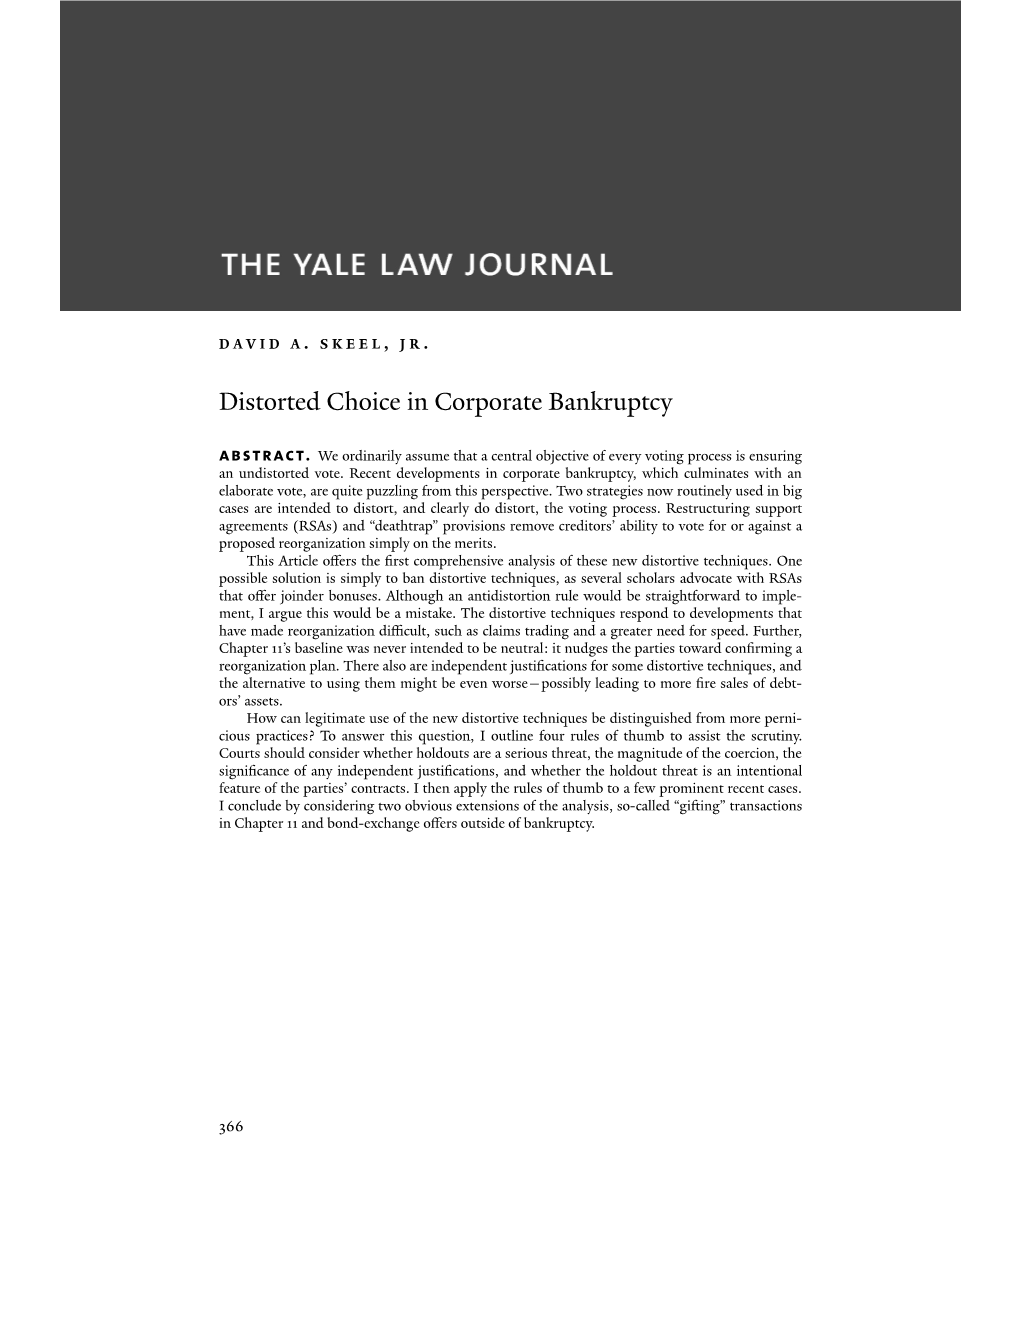 Distorted Choice in Corporate Bankruptcy Abstract